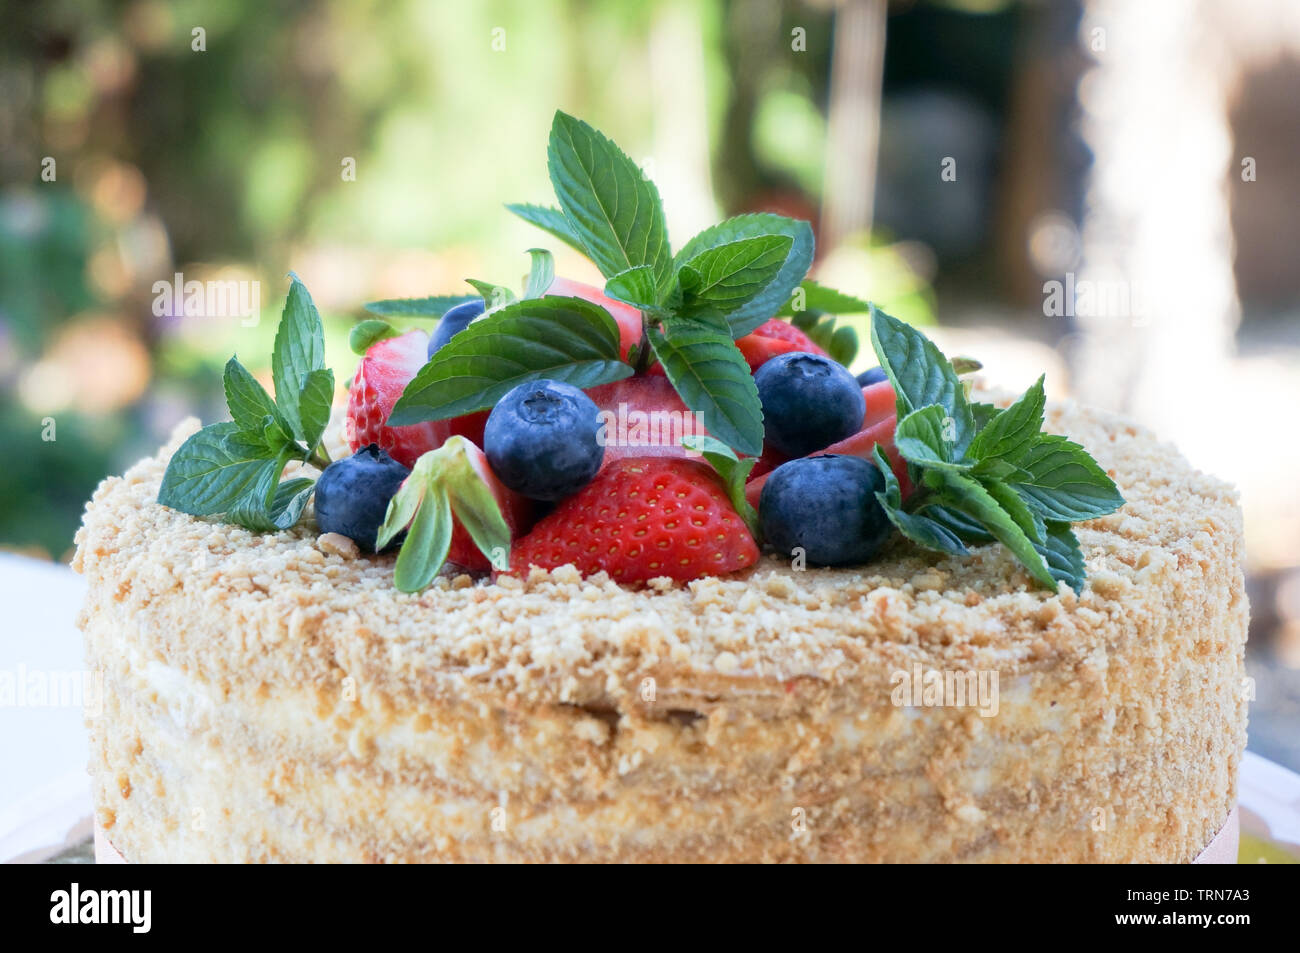 Homemade cake blueberries strawberries and peppermint herb decoration details Stock Photo